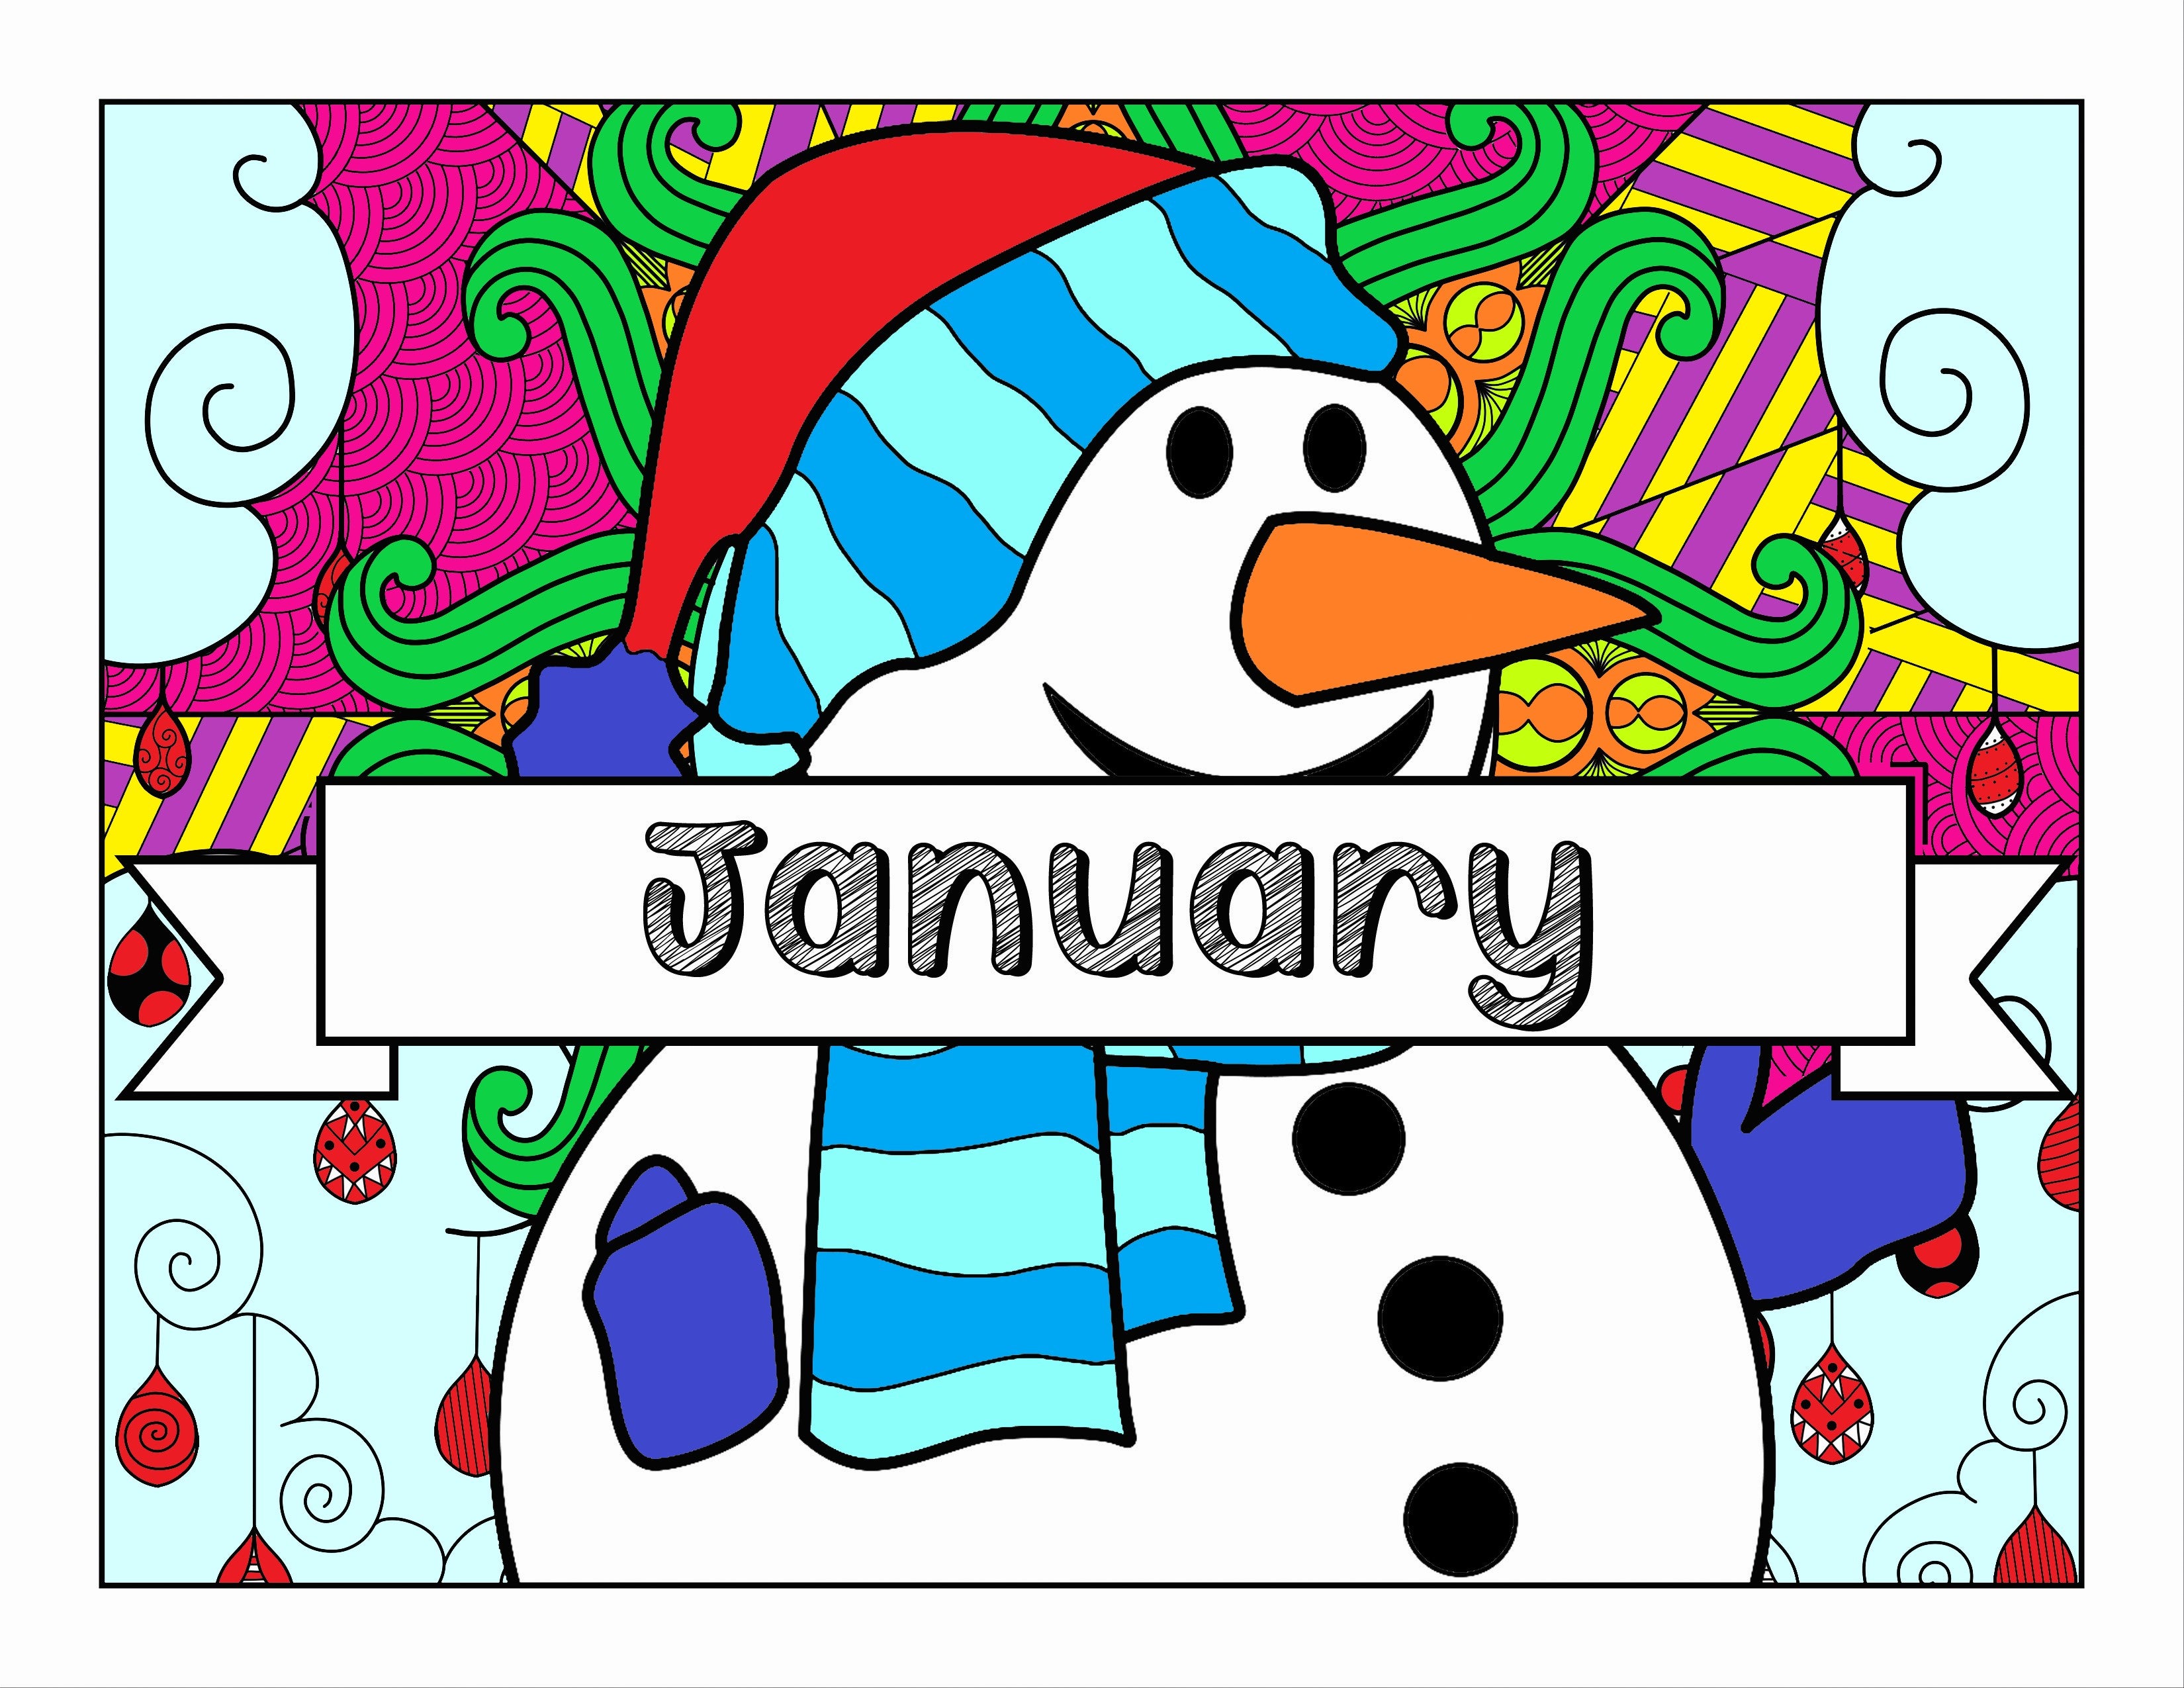 January and Winter-Themed Coloring Book and Planner, Mandalas - 35-Page Printable Digital PDF for Adults and Children